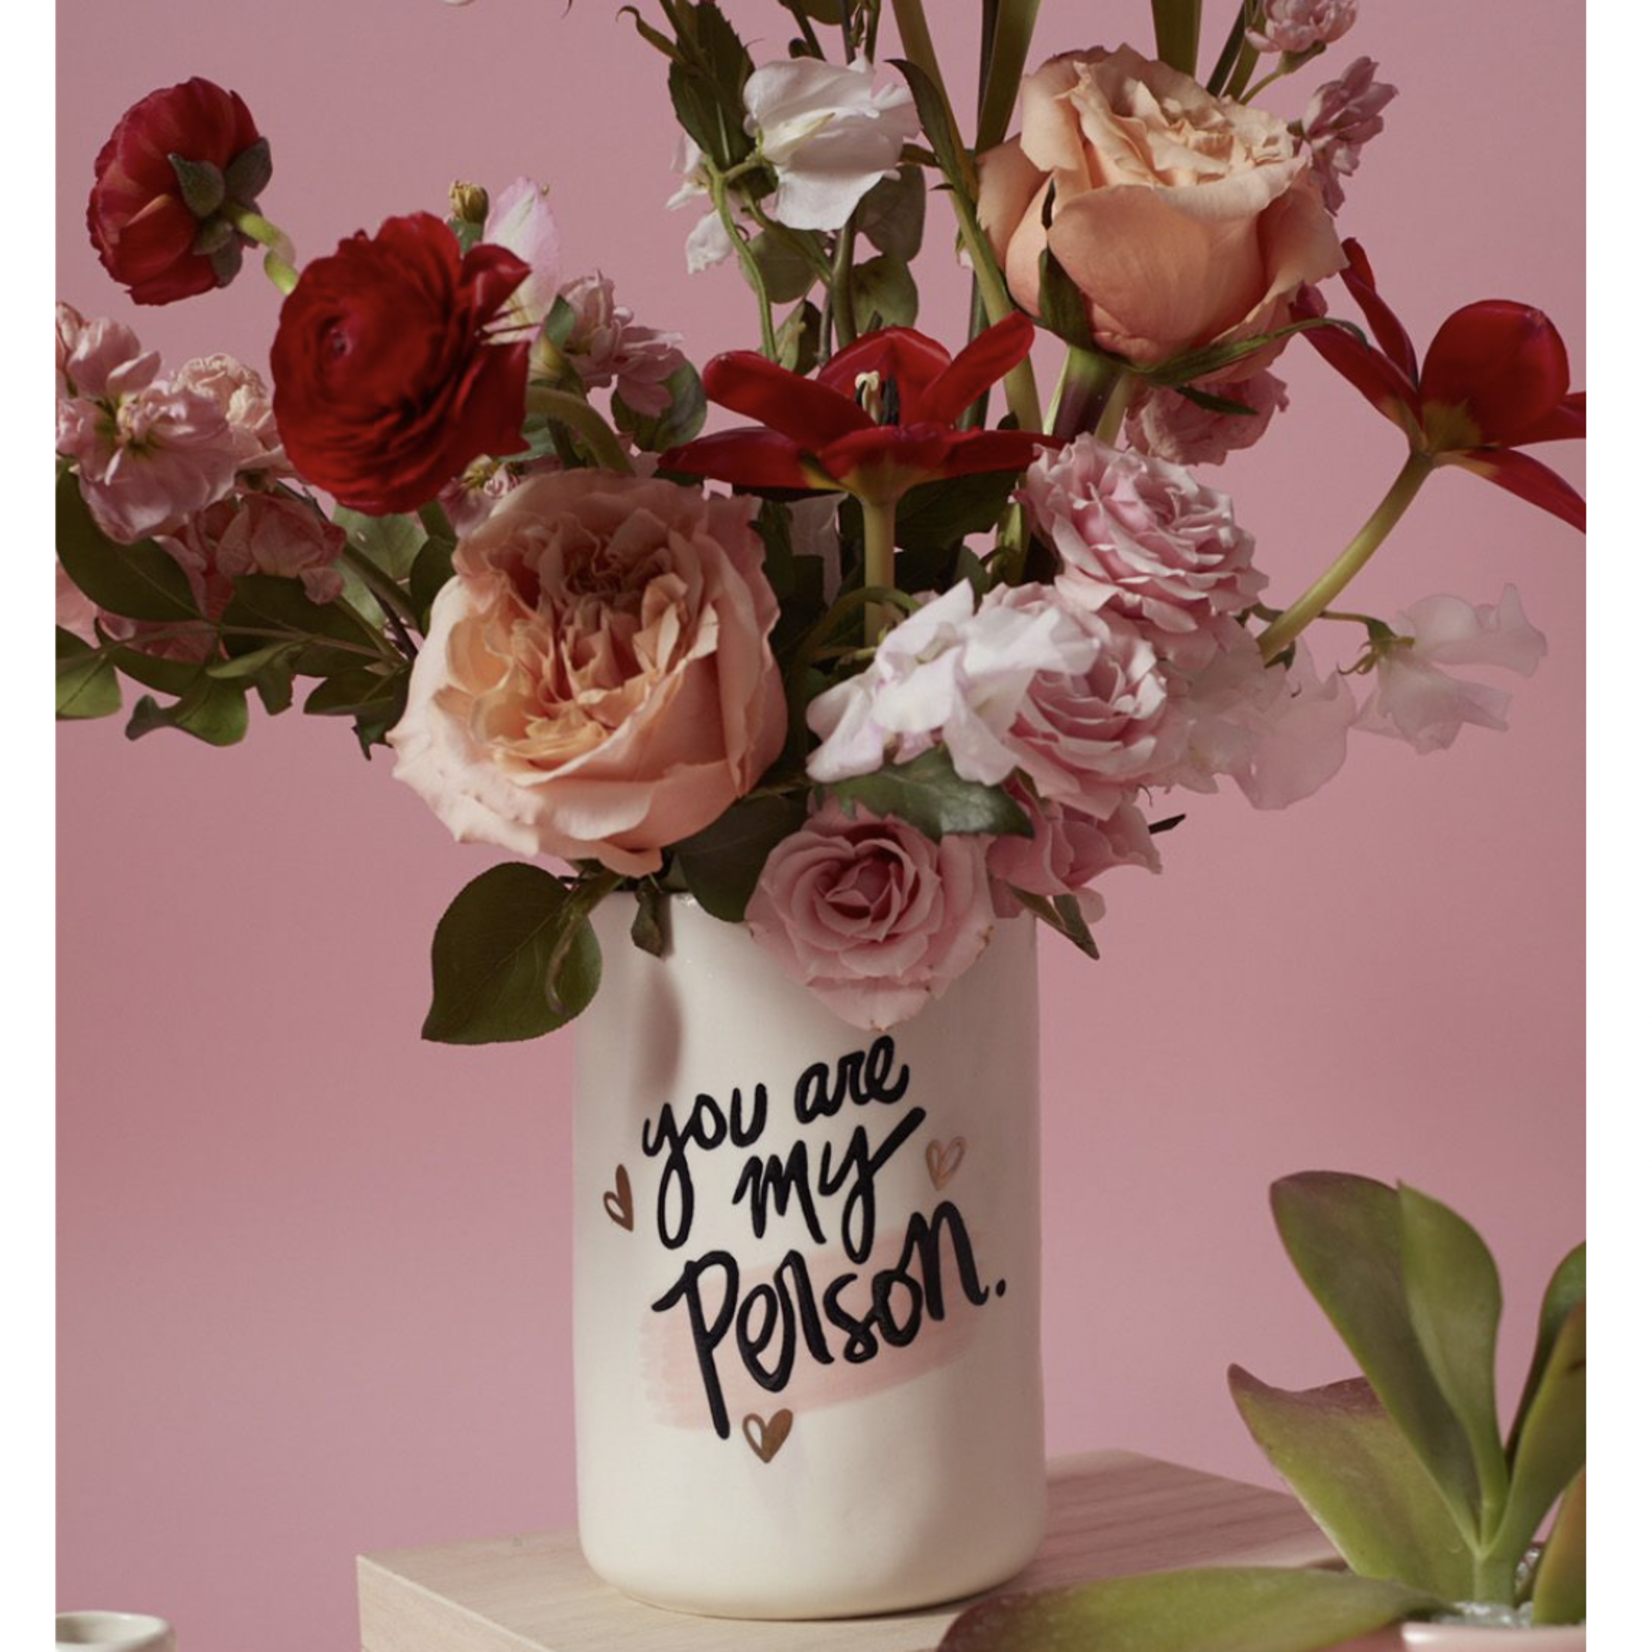 6.25"h x 4" WHITE CERAMIC CYLINDER "YOU ARE MY PERSON"